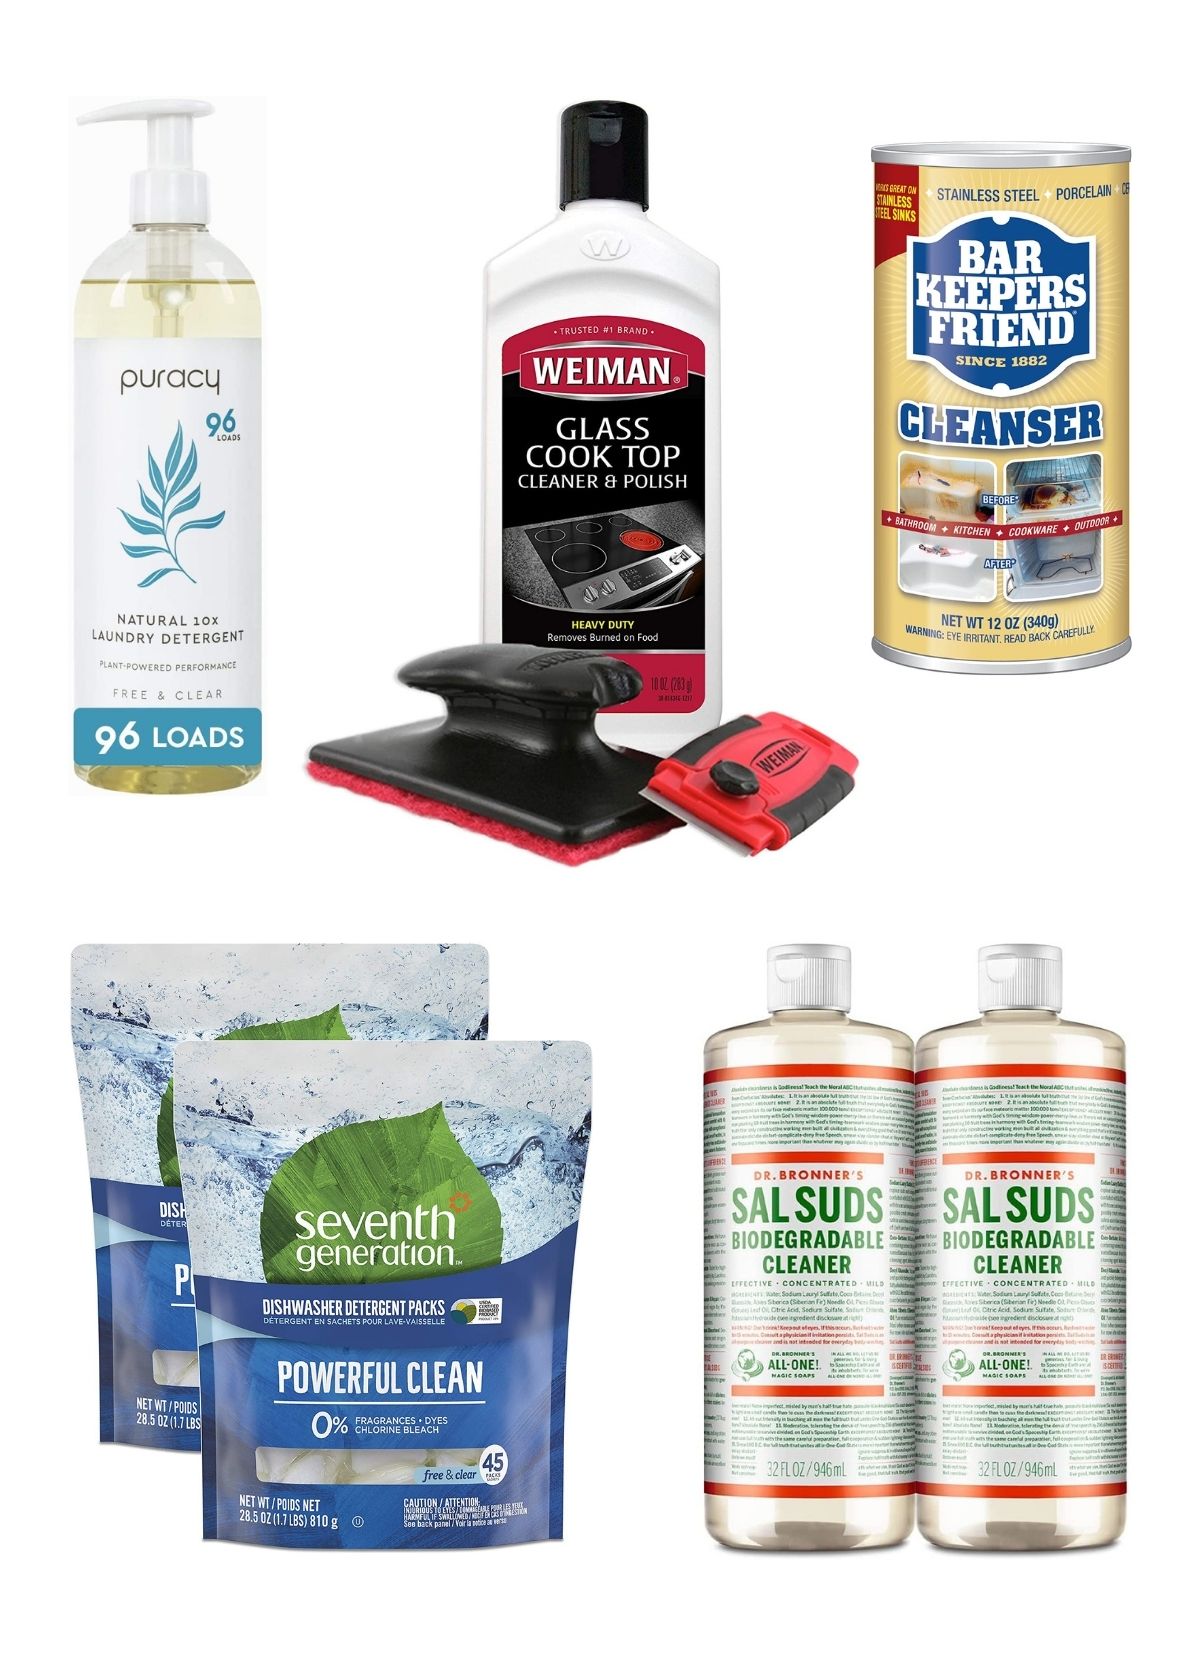 Non-Natural Cleaning Products I Still Buy, Use, and Recommend